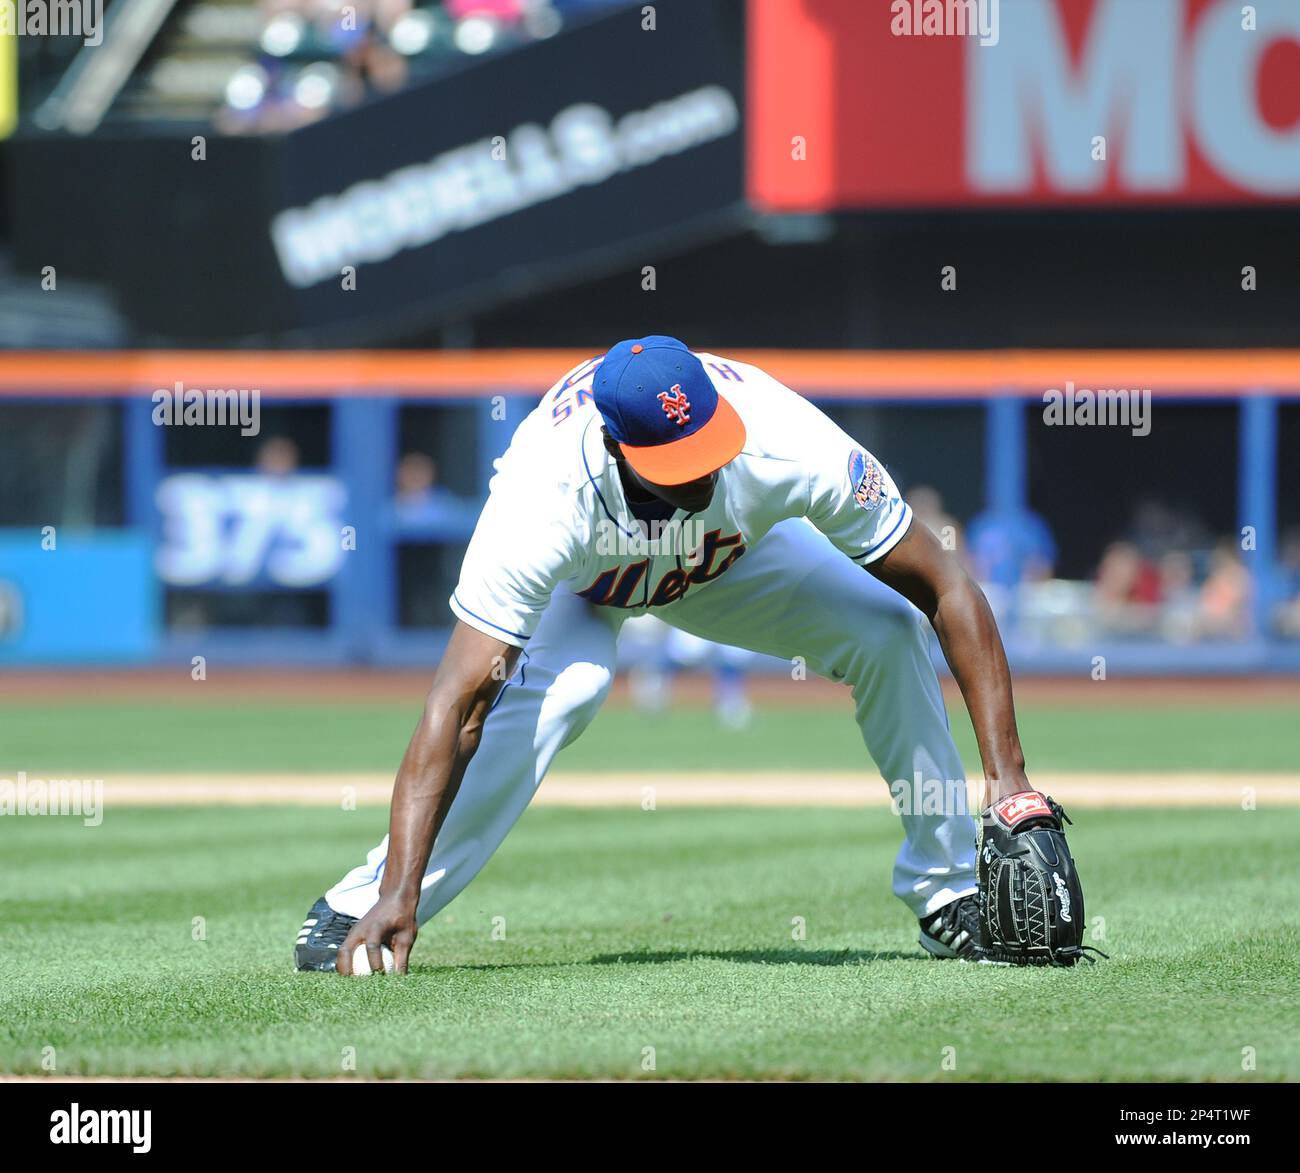 New York Mets pitcher LaTroy Hawkins (32) during game against the Kansas  City Royals at Citi Field in Queens, New York; August 4, 2013. Royals  defeated Mets 6-2. (AP Photo/Tomasso DeRosa Stock Photo - Alamy